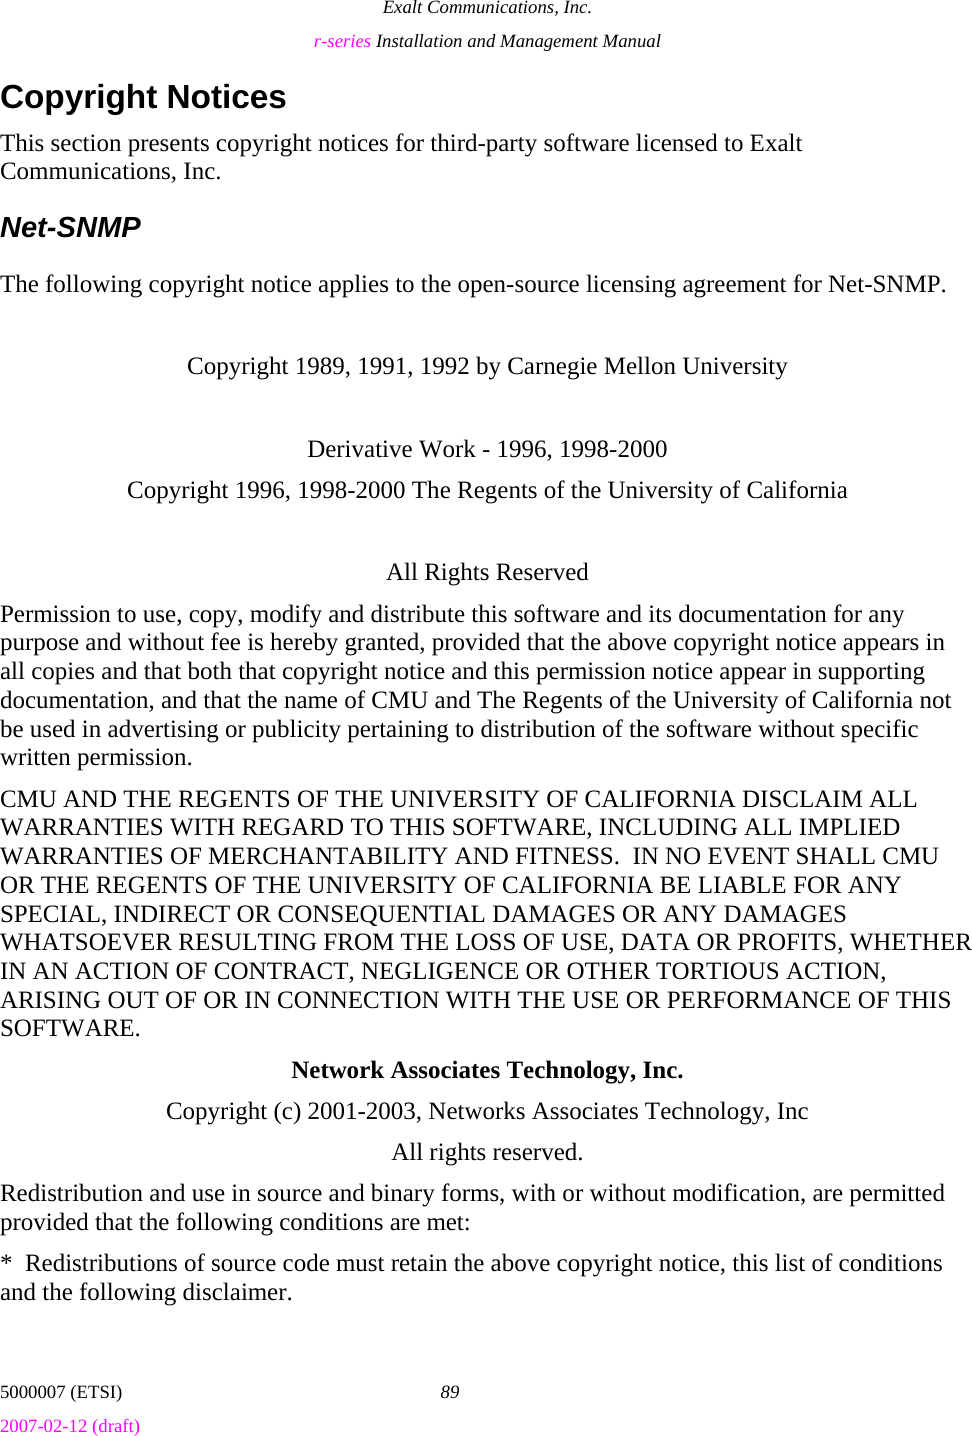 Exalt Communications, Inc. r-series Installation and Management Manual 5000007 (ETSI)  89 2007-02-12 (draft)  Copyright Notices This section presents copyright notices for third-party software licensed to Exalt Communications, Inc. Net-SNMP The following copyright notice applies to the open-source licensing agreement for Net-SNMP.  Copyright 1989, 1991, 1992 by Carnegie Mellon University  Derivative Work - 1996, 1998-2000 Copyright 1996, 1998-2000 The Regents of the University of California  All Rights Reserved Permission to use, copy, modify and distribute this software and its documentation for any purpose and without fee is hereby granted, provided that the above copyright notice appears in all copies and that both that copyright notice and this permission notice appear in supporting documentation, and that the name of CMU and The Regents of the University of California not be used in advertising or publicity pertaining to distribution of the software without specific written permission. CMU AND THE REGENTS OF THE UNIVERSITY OF CALIFORNIA DISCLAIM ALL WARRANTIES WITH REGARD TO THIS SOFTWARE, INCLUDING ALL IMPLIED WARRANTIES OF MERCHANTABILITY AND FITNESS.  IN NO EVENT SHALL CMU OR THE REGENTS OF THE UNIVERSITY OF CALIFORNIA BE LIABLE FOR ANY SPECIAL, INDIRECT OR CONSEQUENTIAL DAMAGES OR ANY DAMAGES WHATSOEVER RESULTING FROM THE LOSS OF USE, DATA OR PROFITS, WHETHER IN AN ACTION OF CONTRACT, NEGLIGENCE OR OTHER TORTIOUS ACTION, ARISING OUT OF OR IN CONNECTION WITH THE USE OR PERFORMANCE OF THIS SOFTWARE. Network Associates Technology, Inc. Copyright (c) 2001-2003, Networks Associates Technology, Inc All rights reserved. Redistribution and use in source and binary forms, with or without modification, are permitted provided that the following conditions are met: *  Redistributions of source code must retain the above copyright notice, this list of conditions and the following disclaimer. 